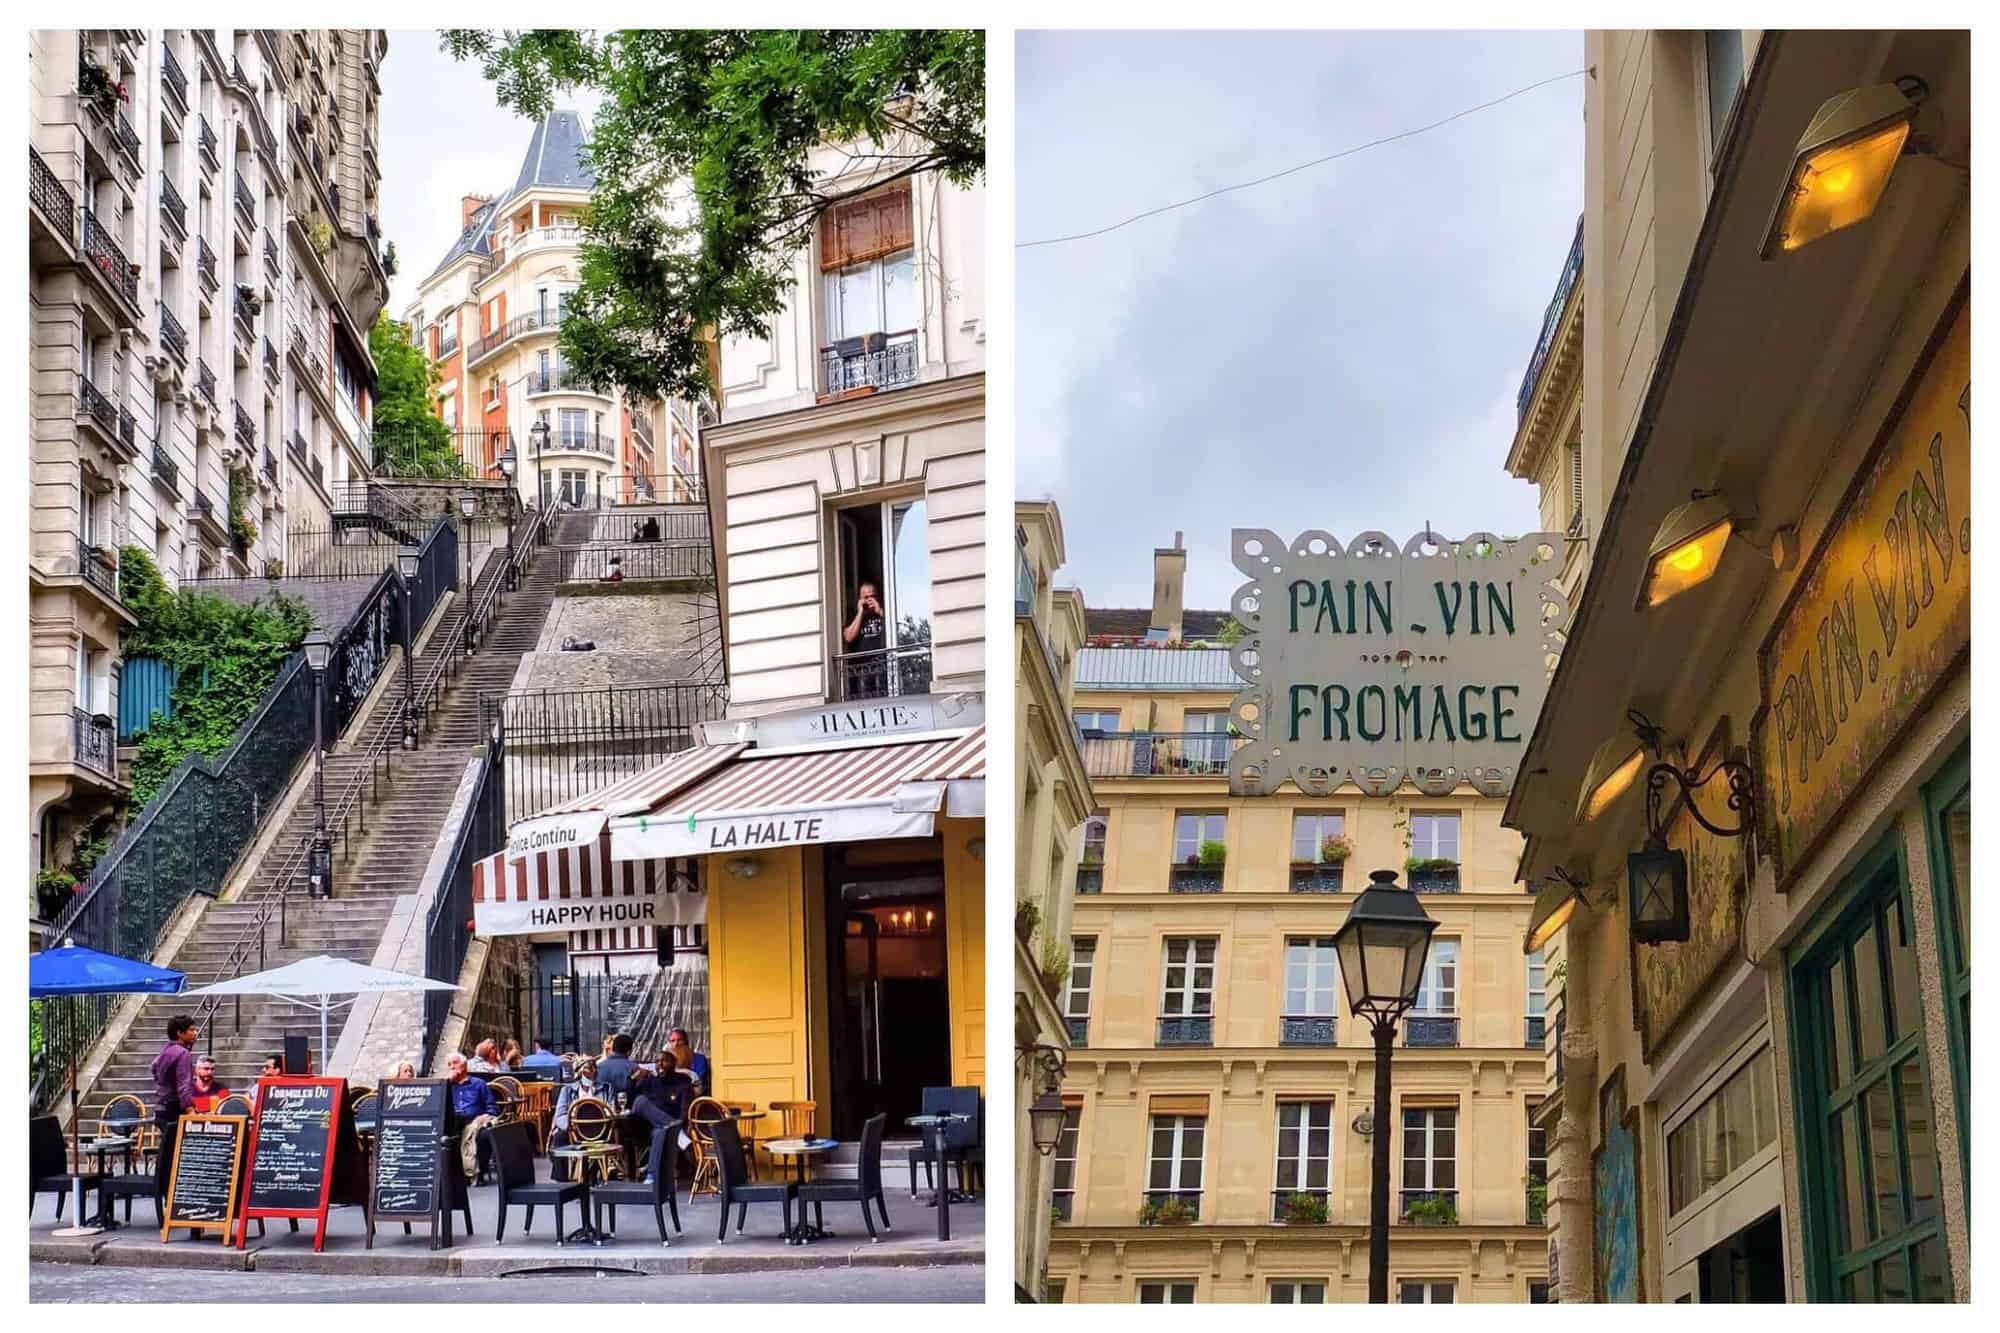 left: the stairs at montmartre. we can also see the cafe La Halte and people sitting on the terrace. A man can be seen on the window above the cafe,  talking on the phone.
right: a sign saying "pain, vin, fromgae". behind it, we can see a yellow building in Paris. 